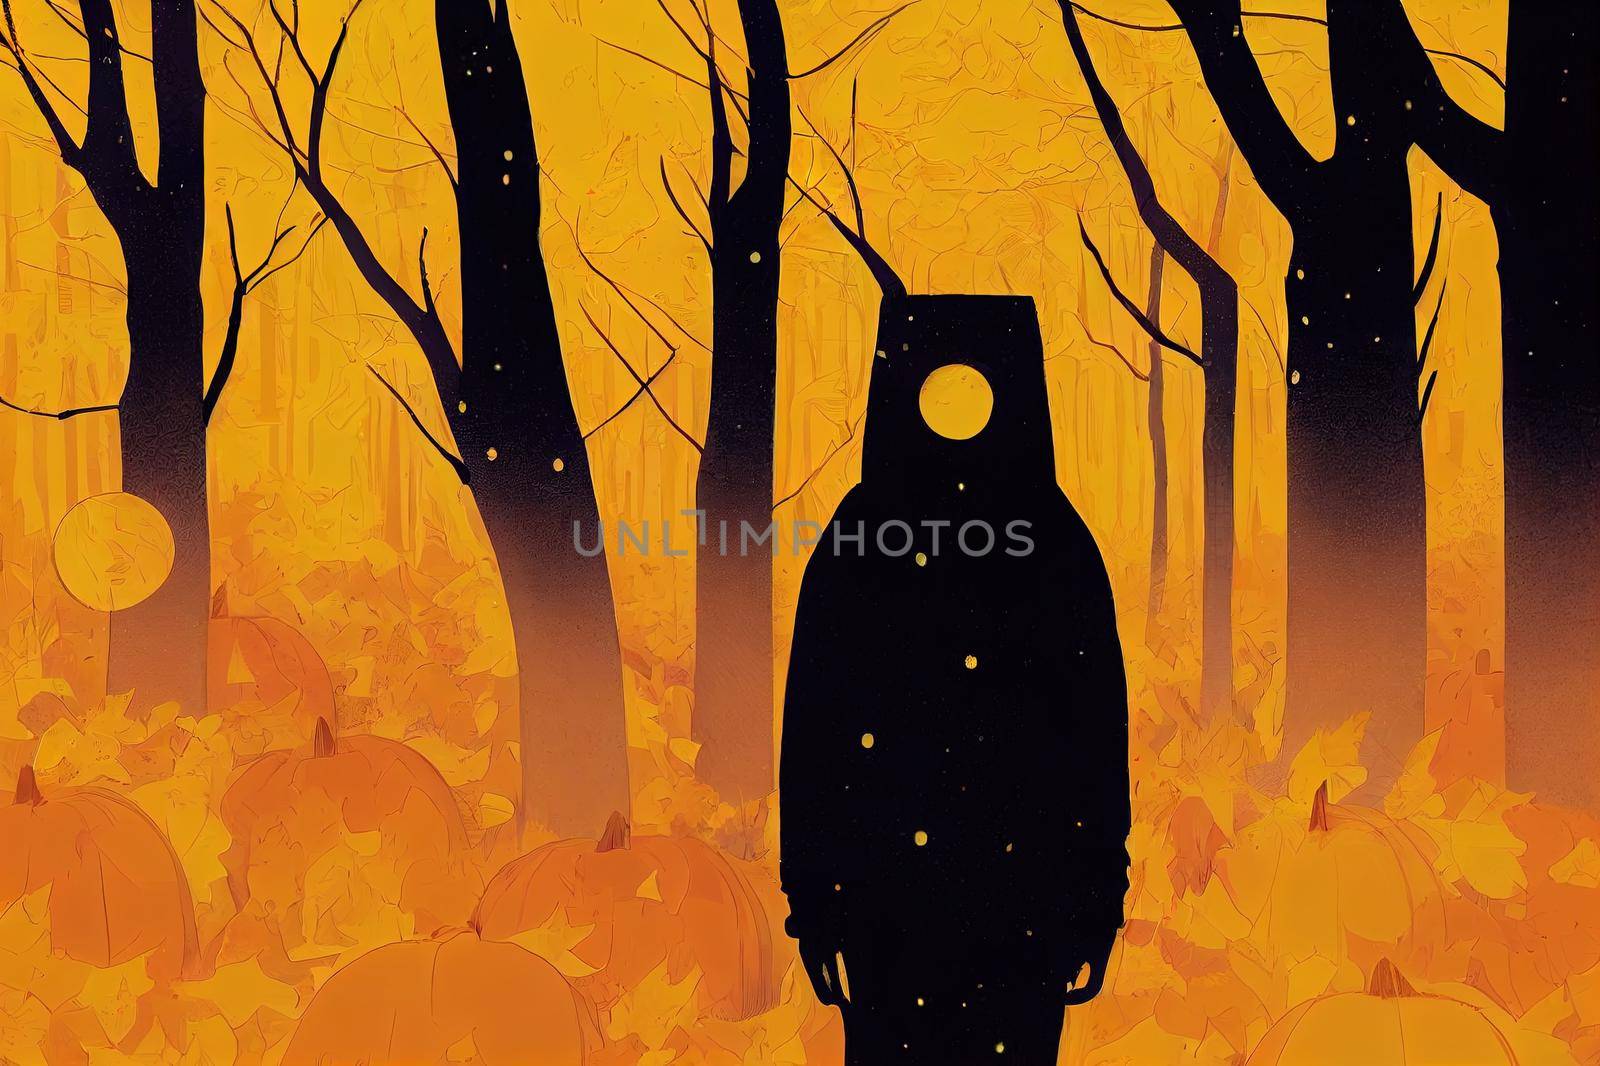 The astronaut in the middle of the autumn forest and looking at the strange light in his hand digital art style illustration painting